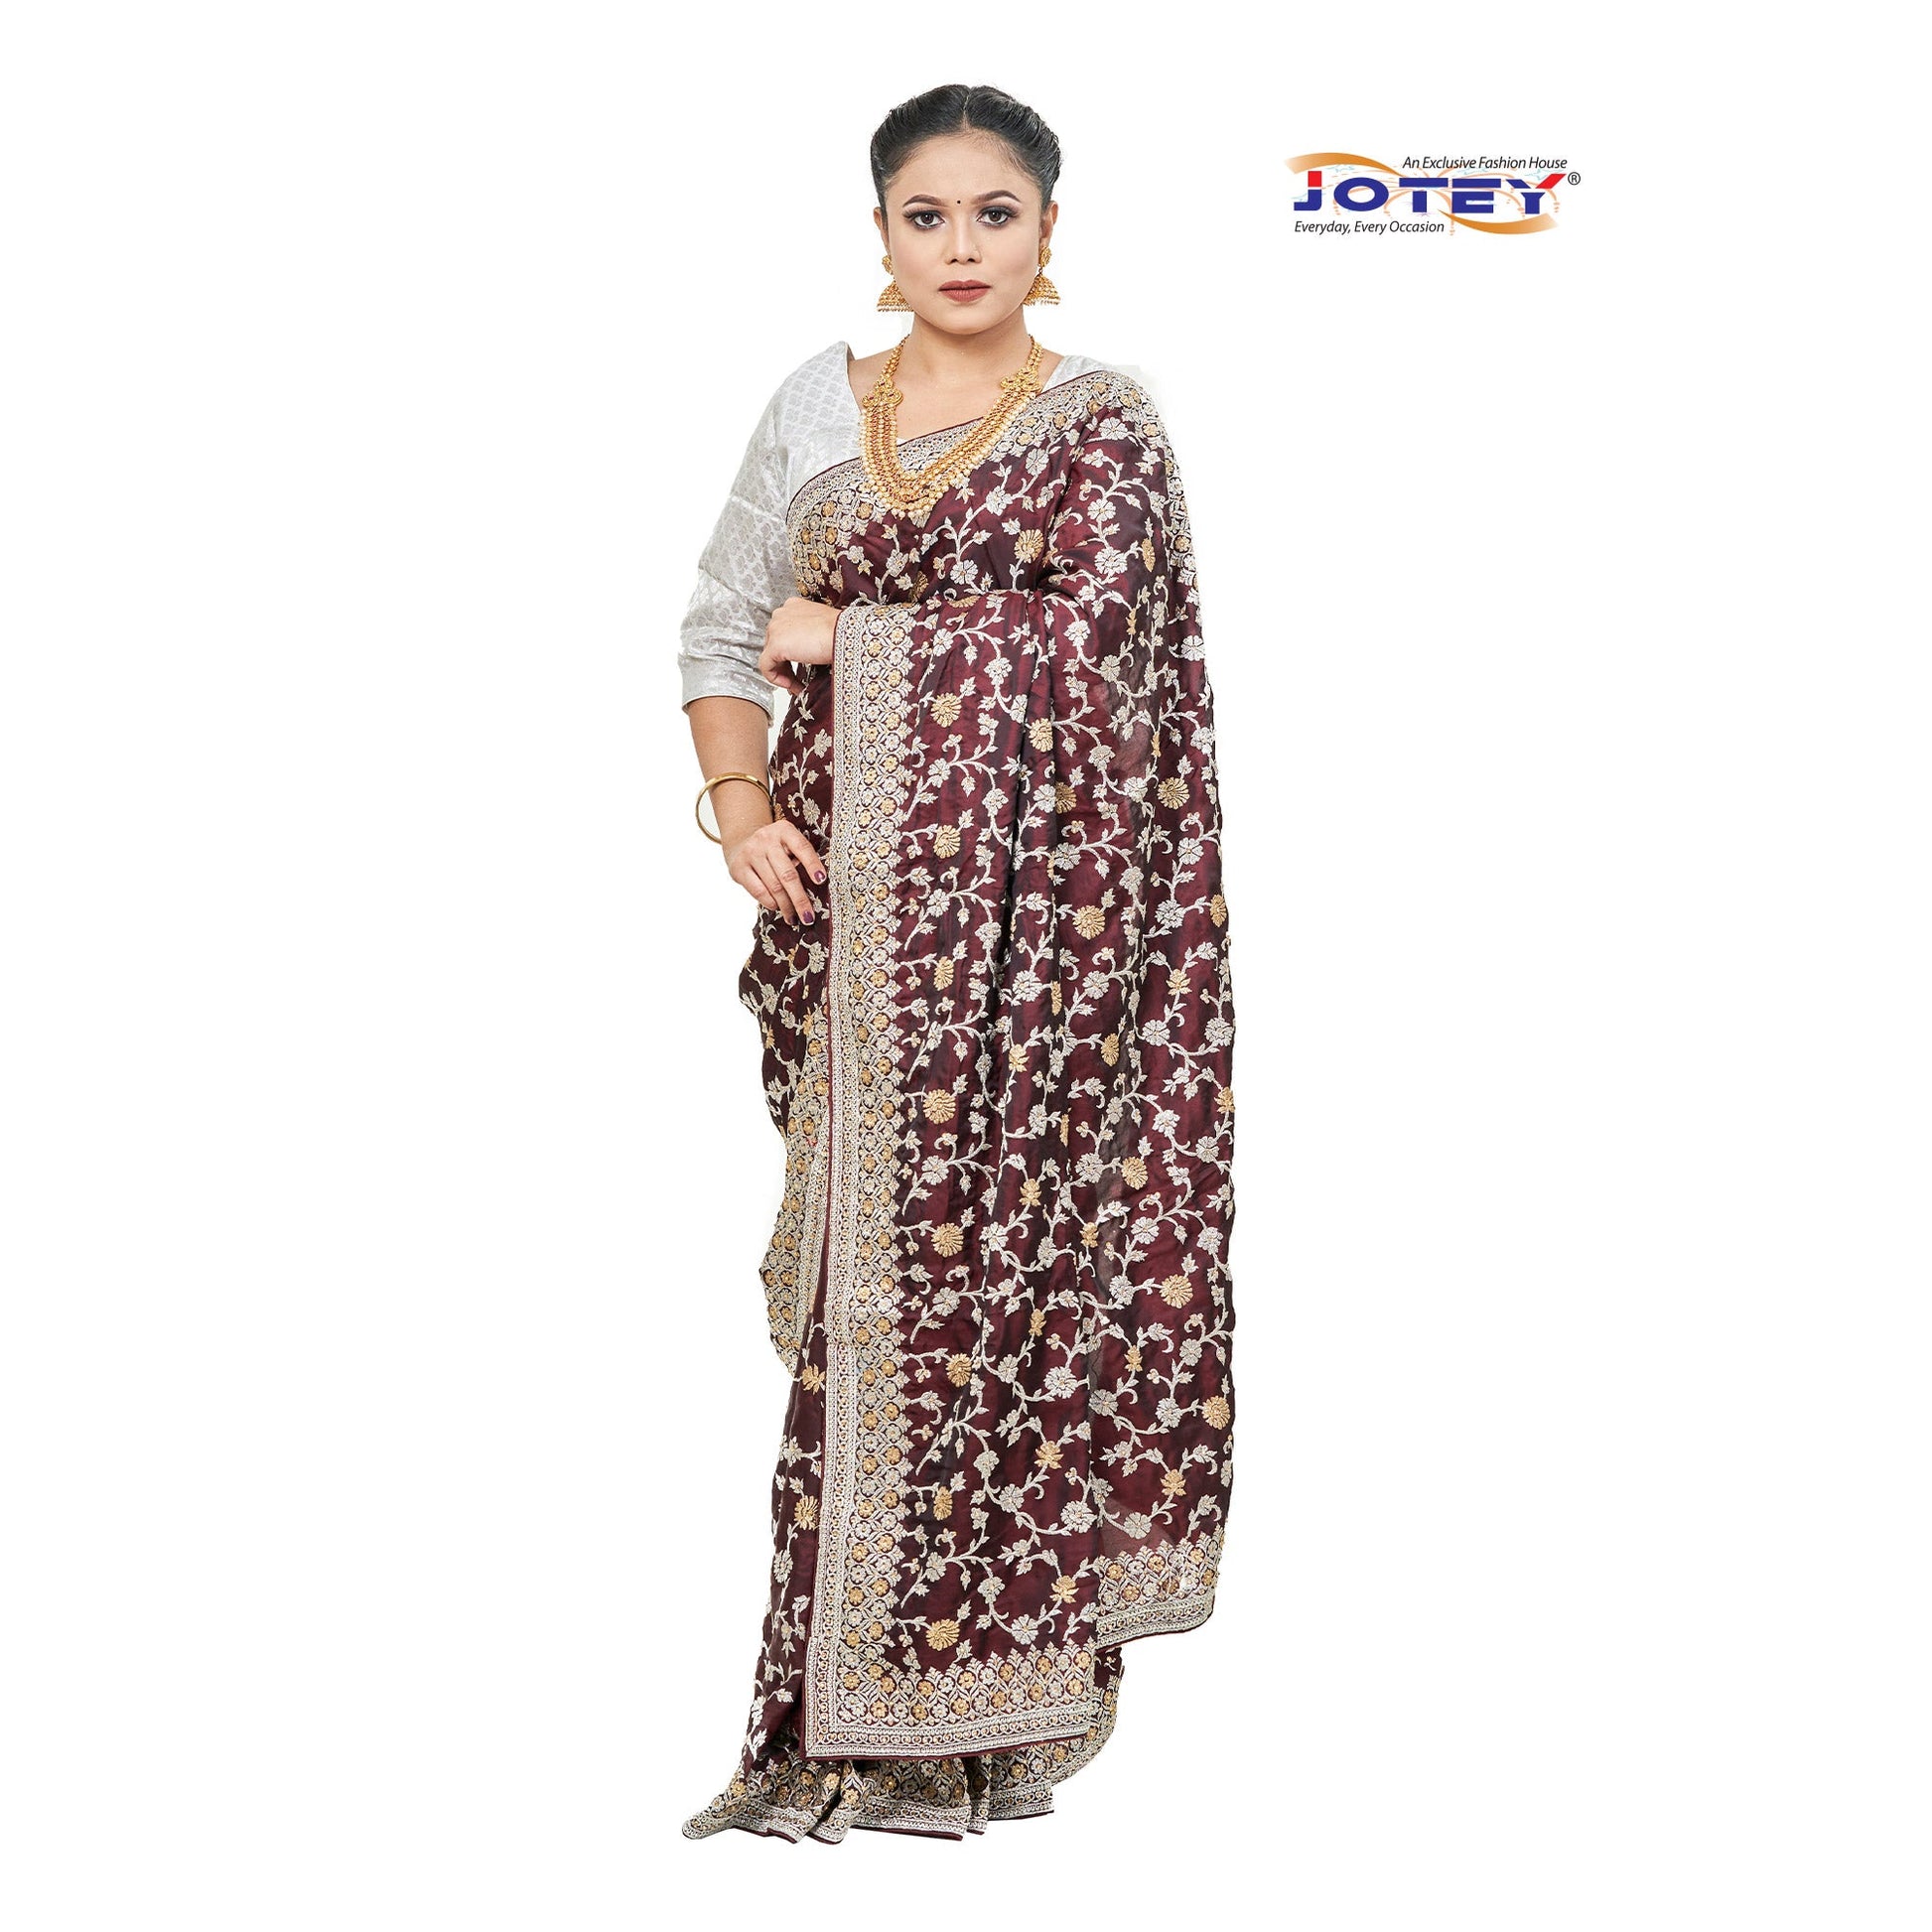 All Over Heavy Embroidery Dupion Silk Saree Jotey